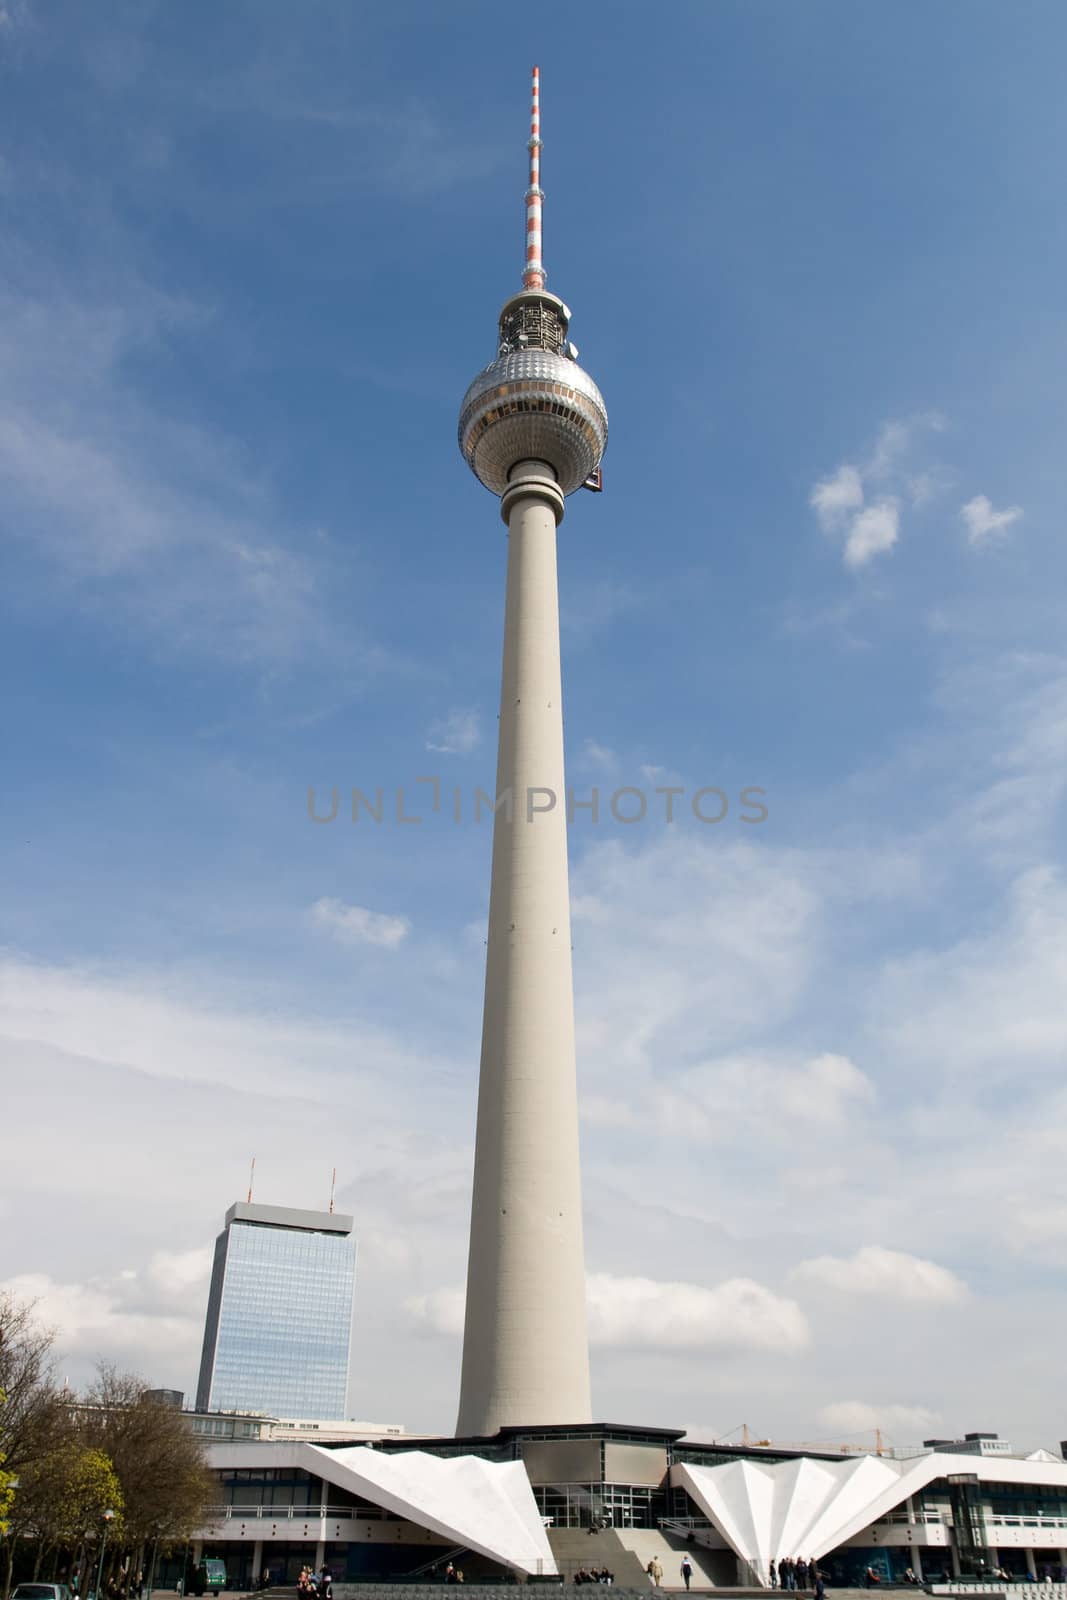 Berlin TV tower agaist blue sky with white clouds